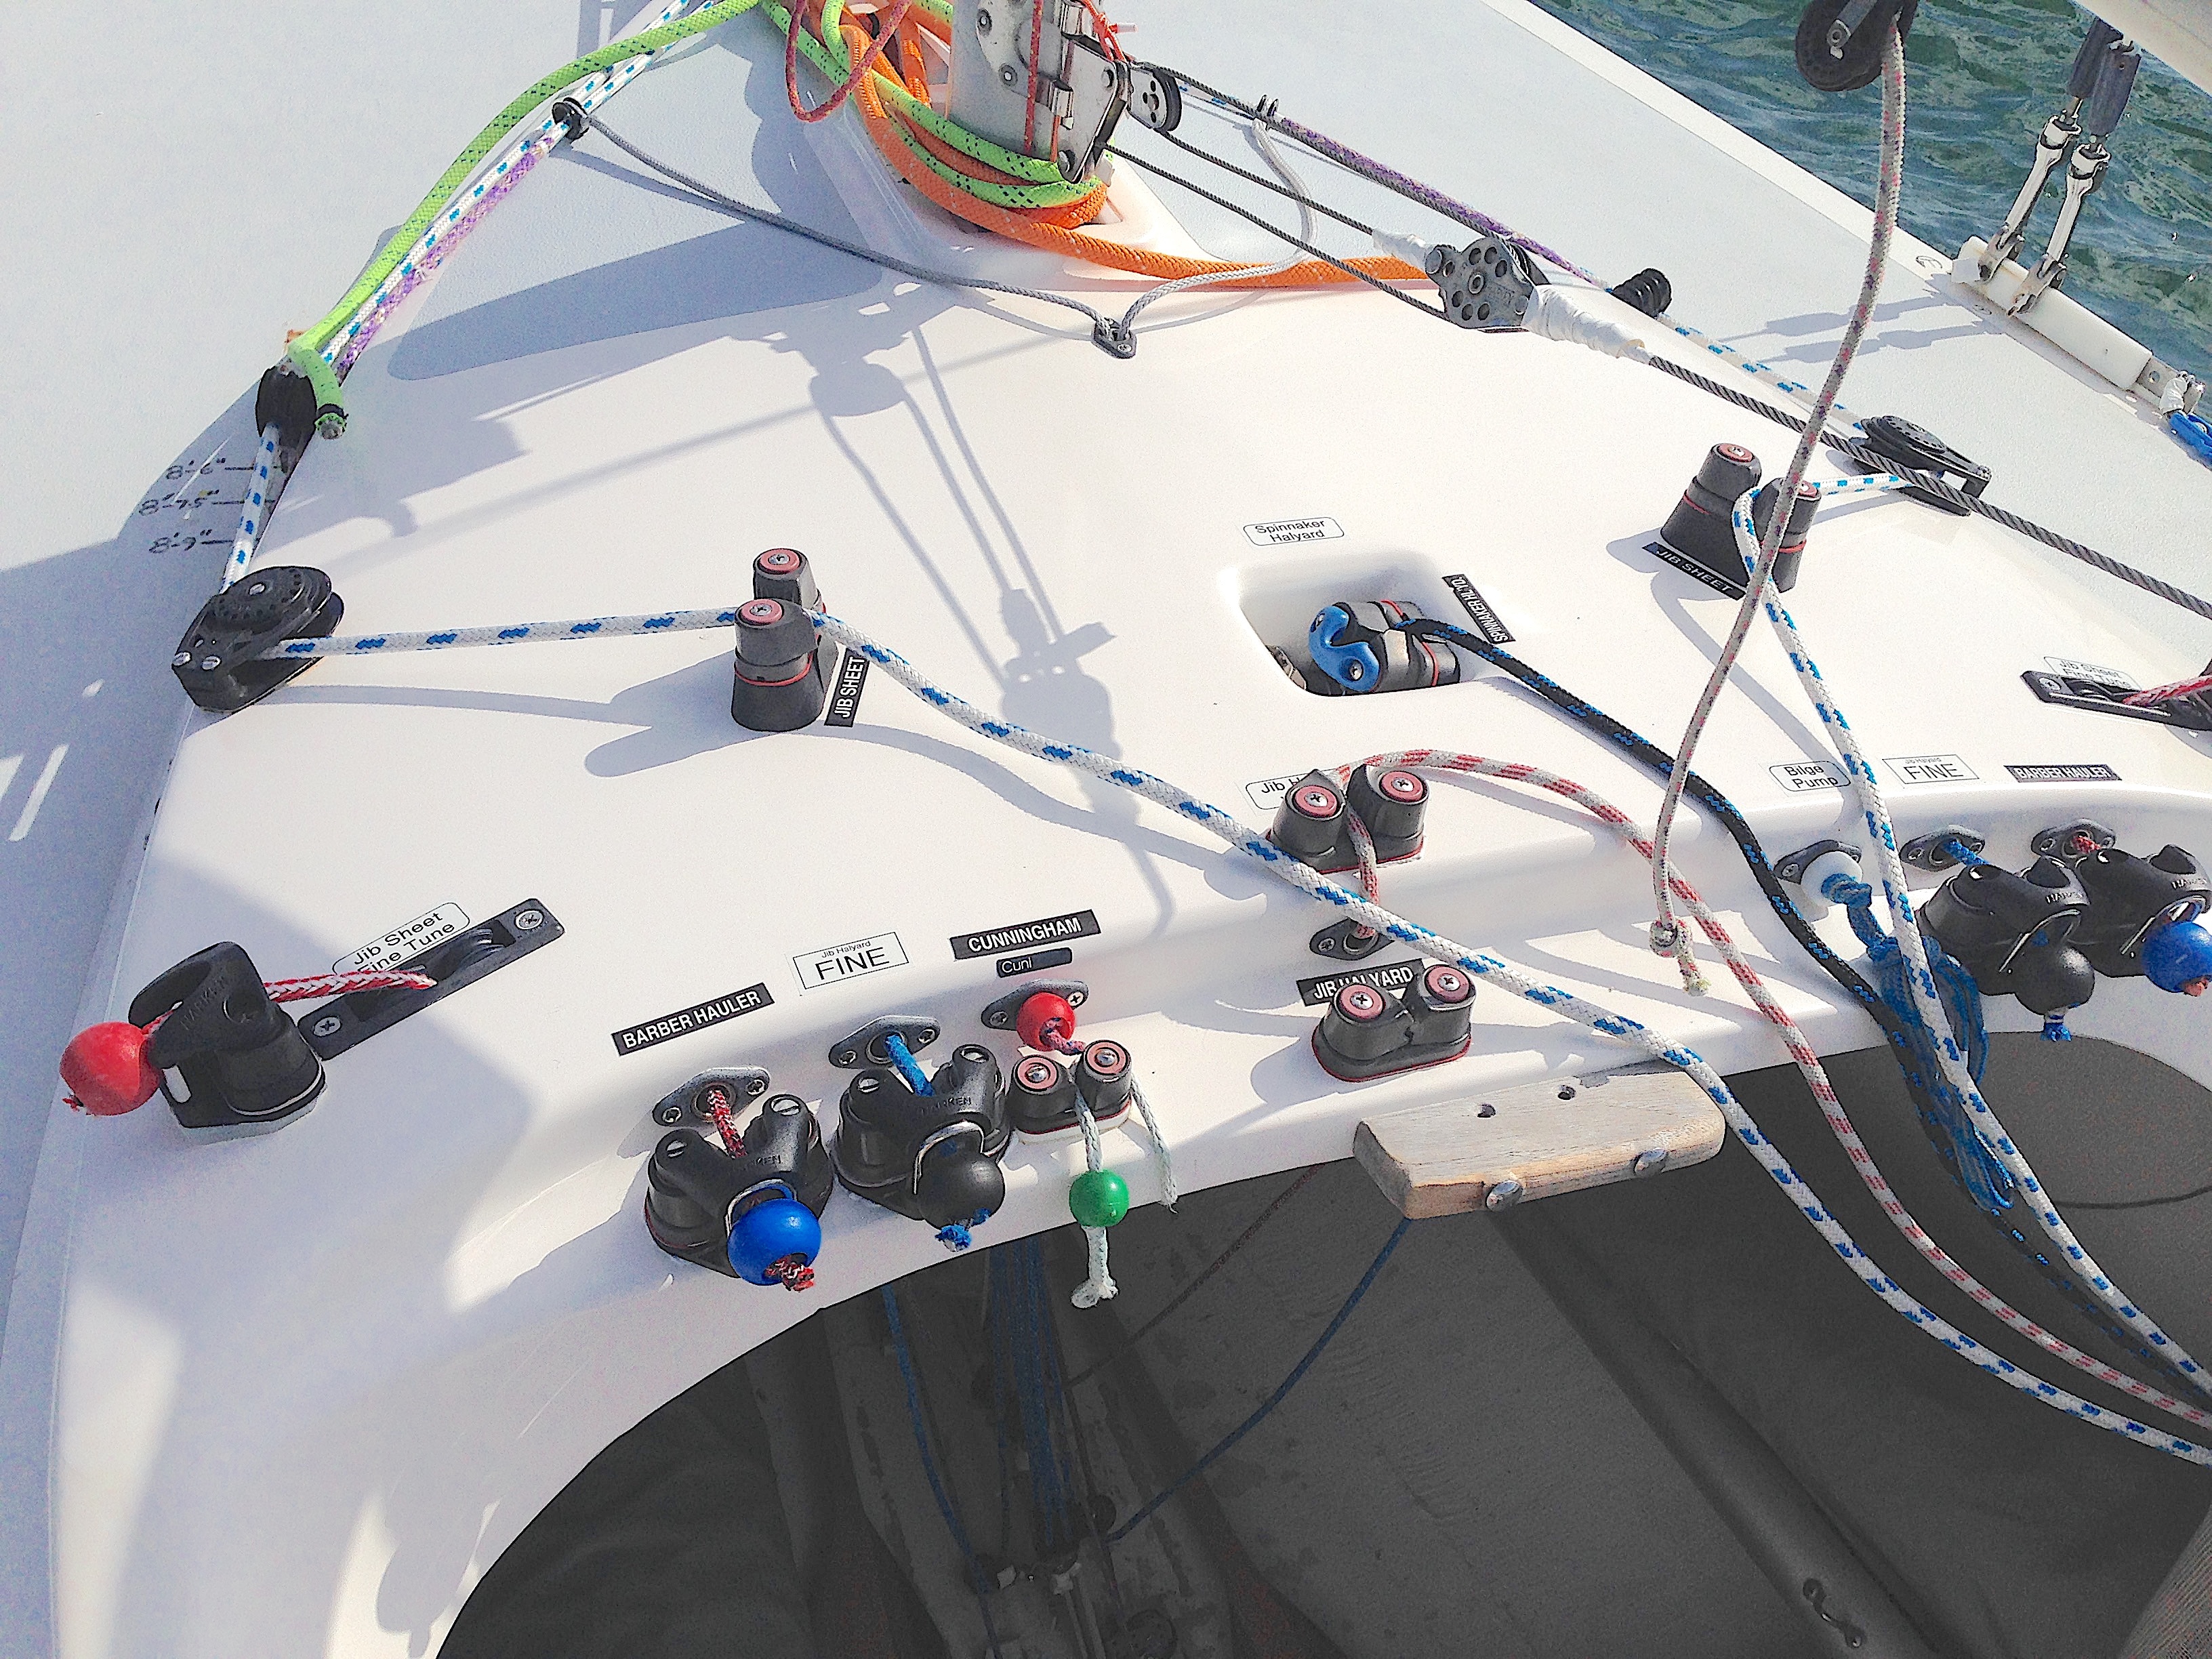 The International Etchells features 14 different lines to be adjusted depending on the conditions.